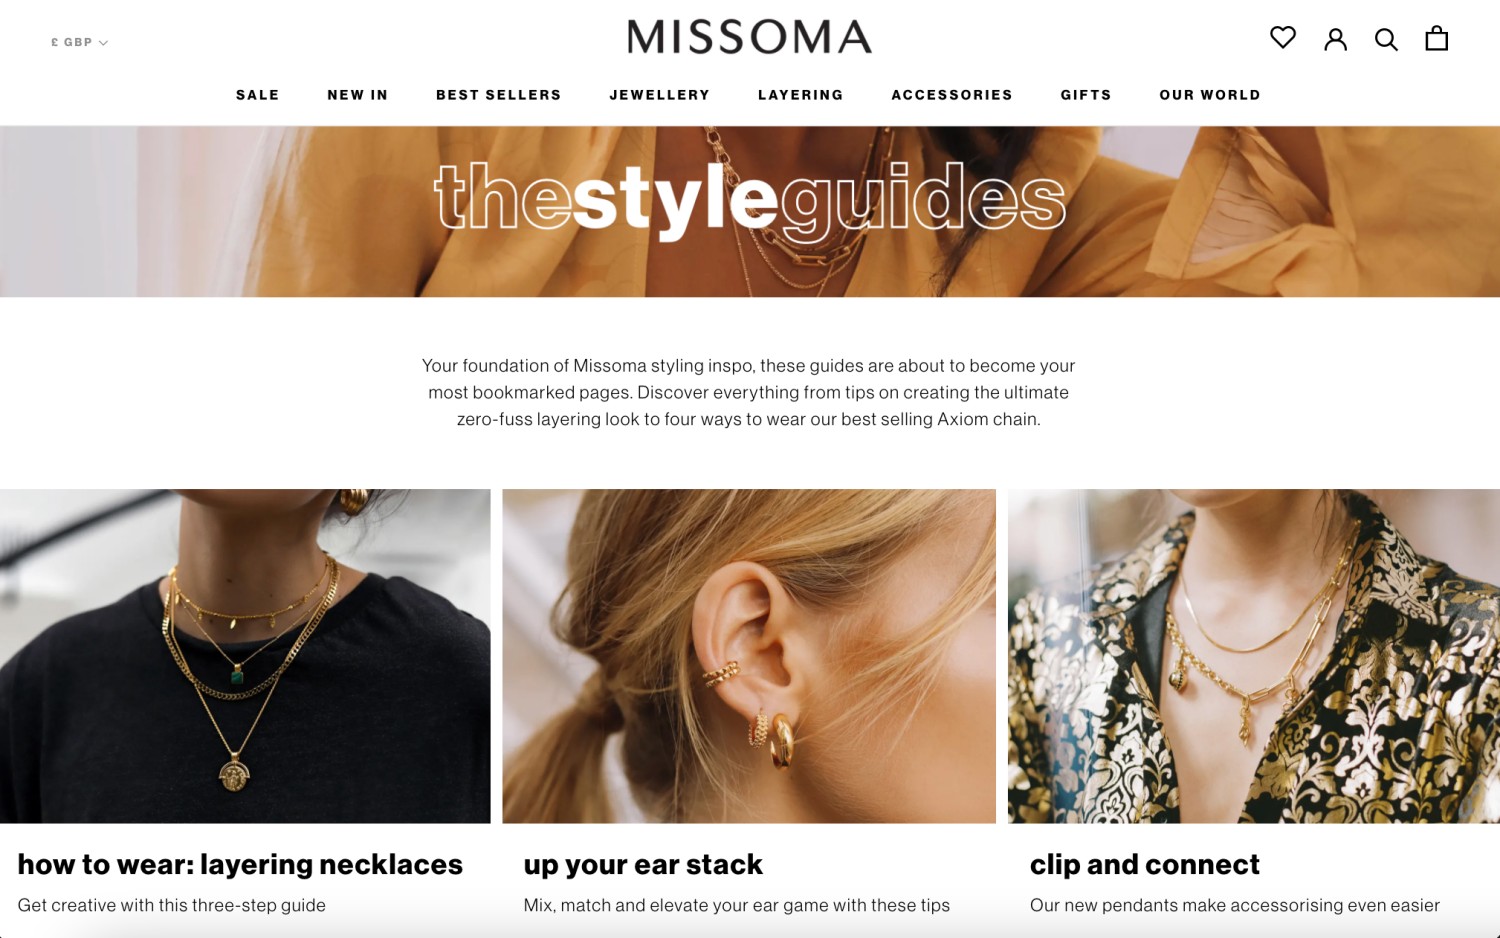 Missoma online shopping experiences 